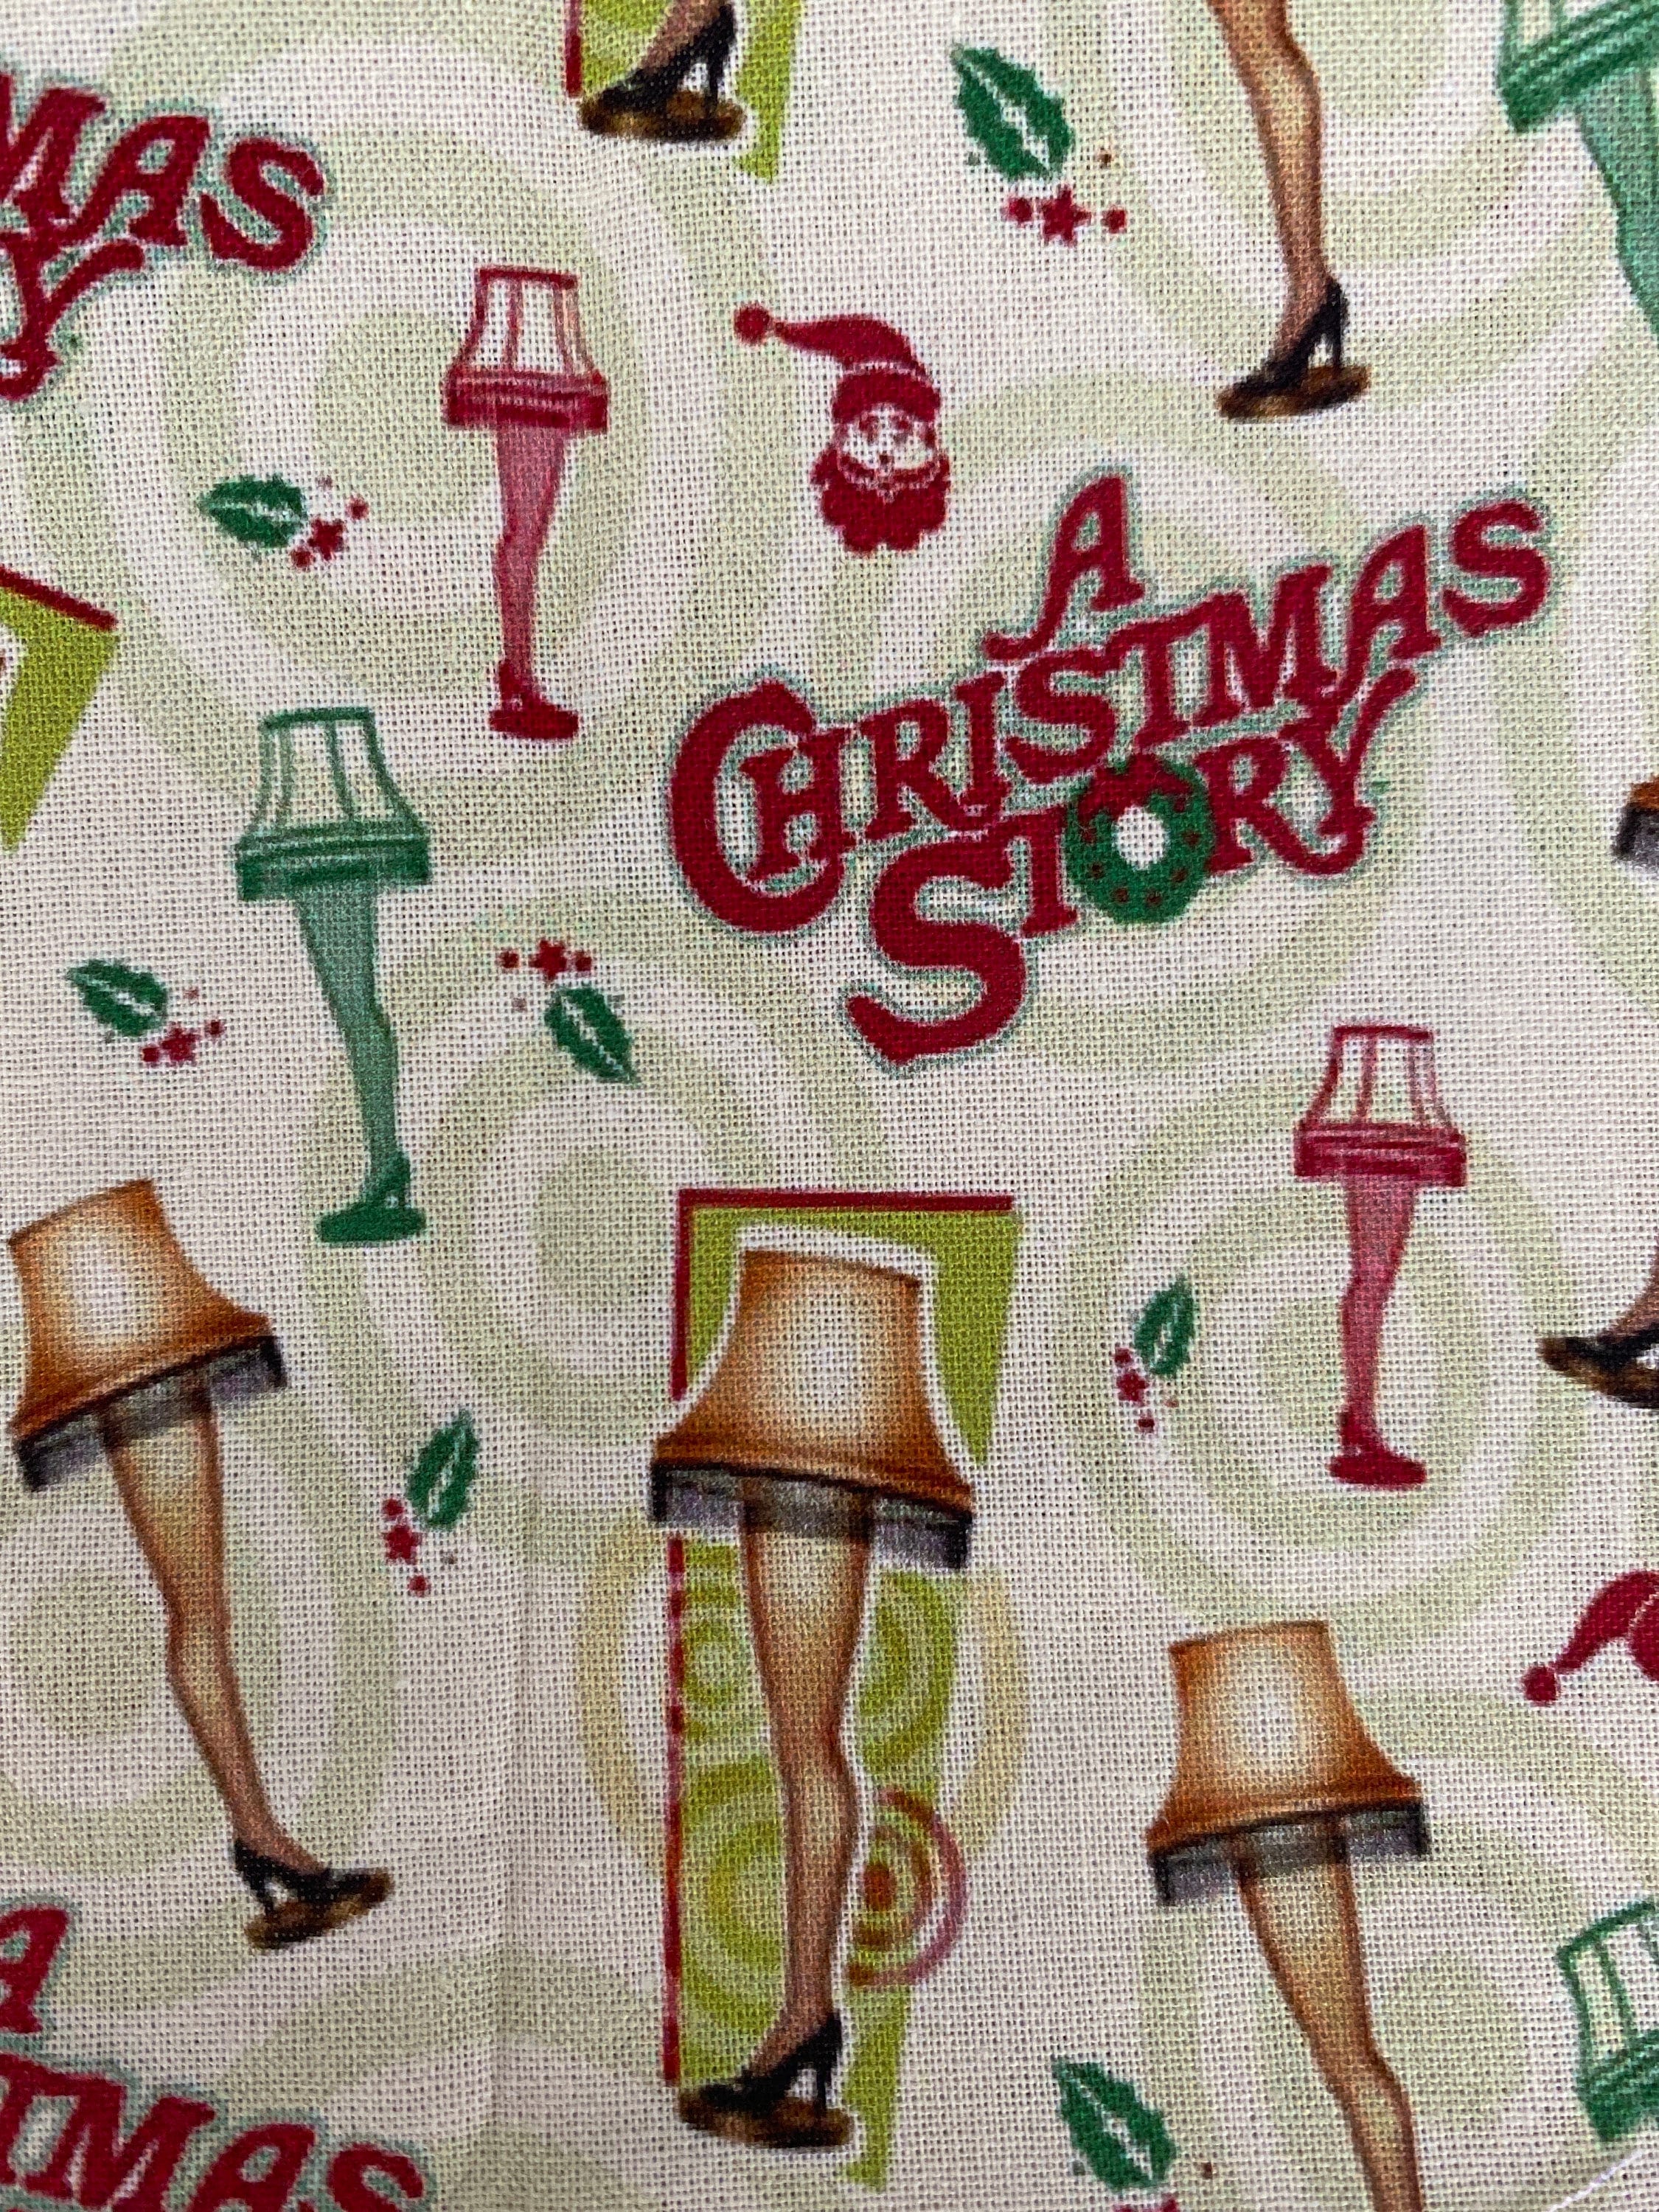 18 x 10" A Christmas Story Fabric 100% Cotton Fabric Remnant Leg Lamp